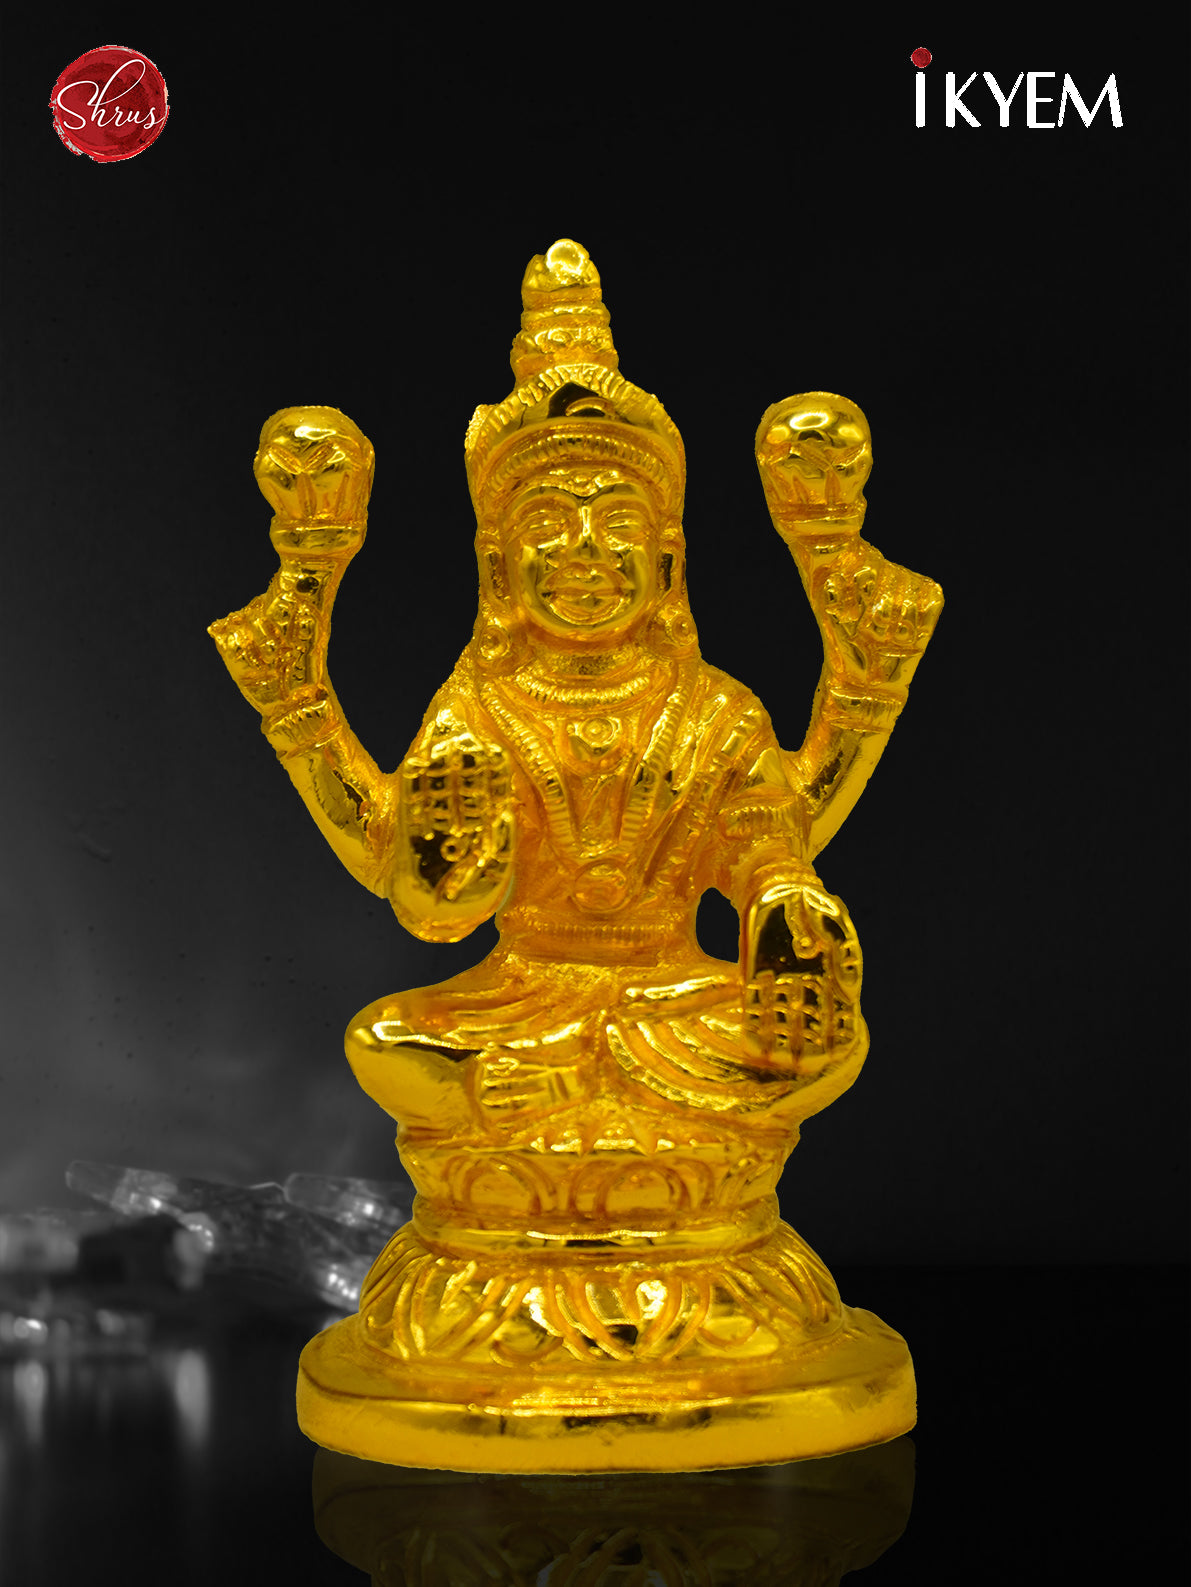 24 Kt Gold Coated Lakshmi for Gifting and Car Dashboard